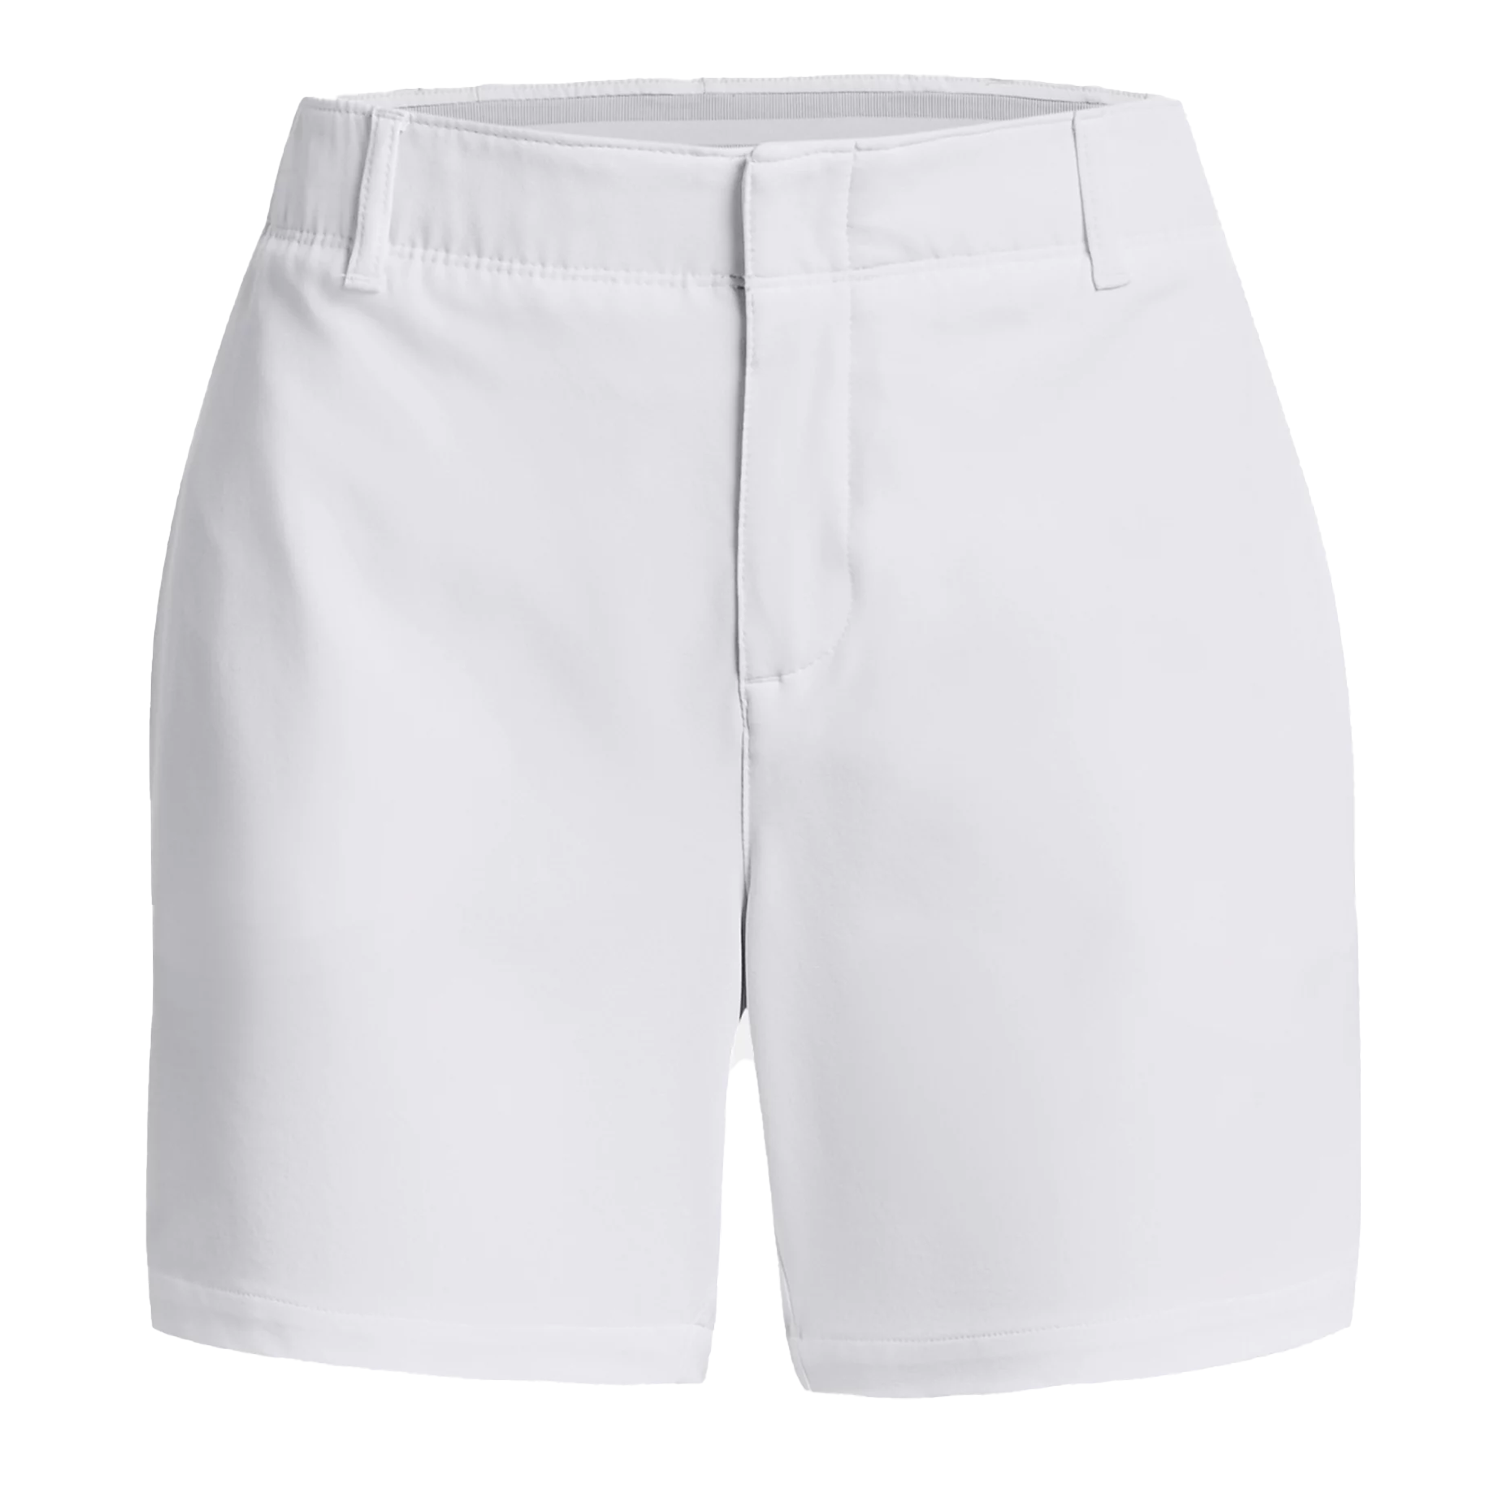 Under Armour Links Ladies Shorty Shorts